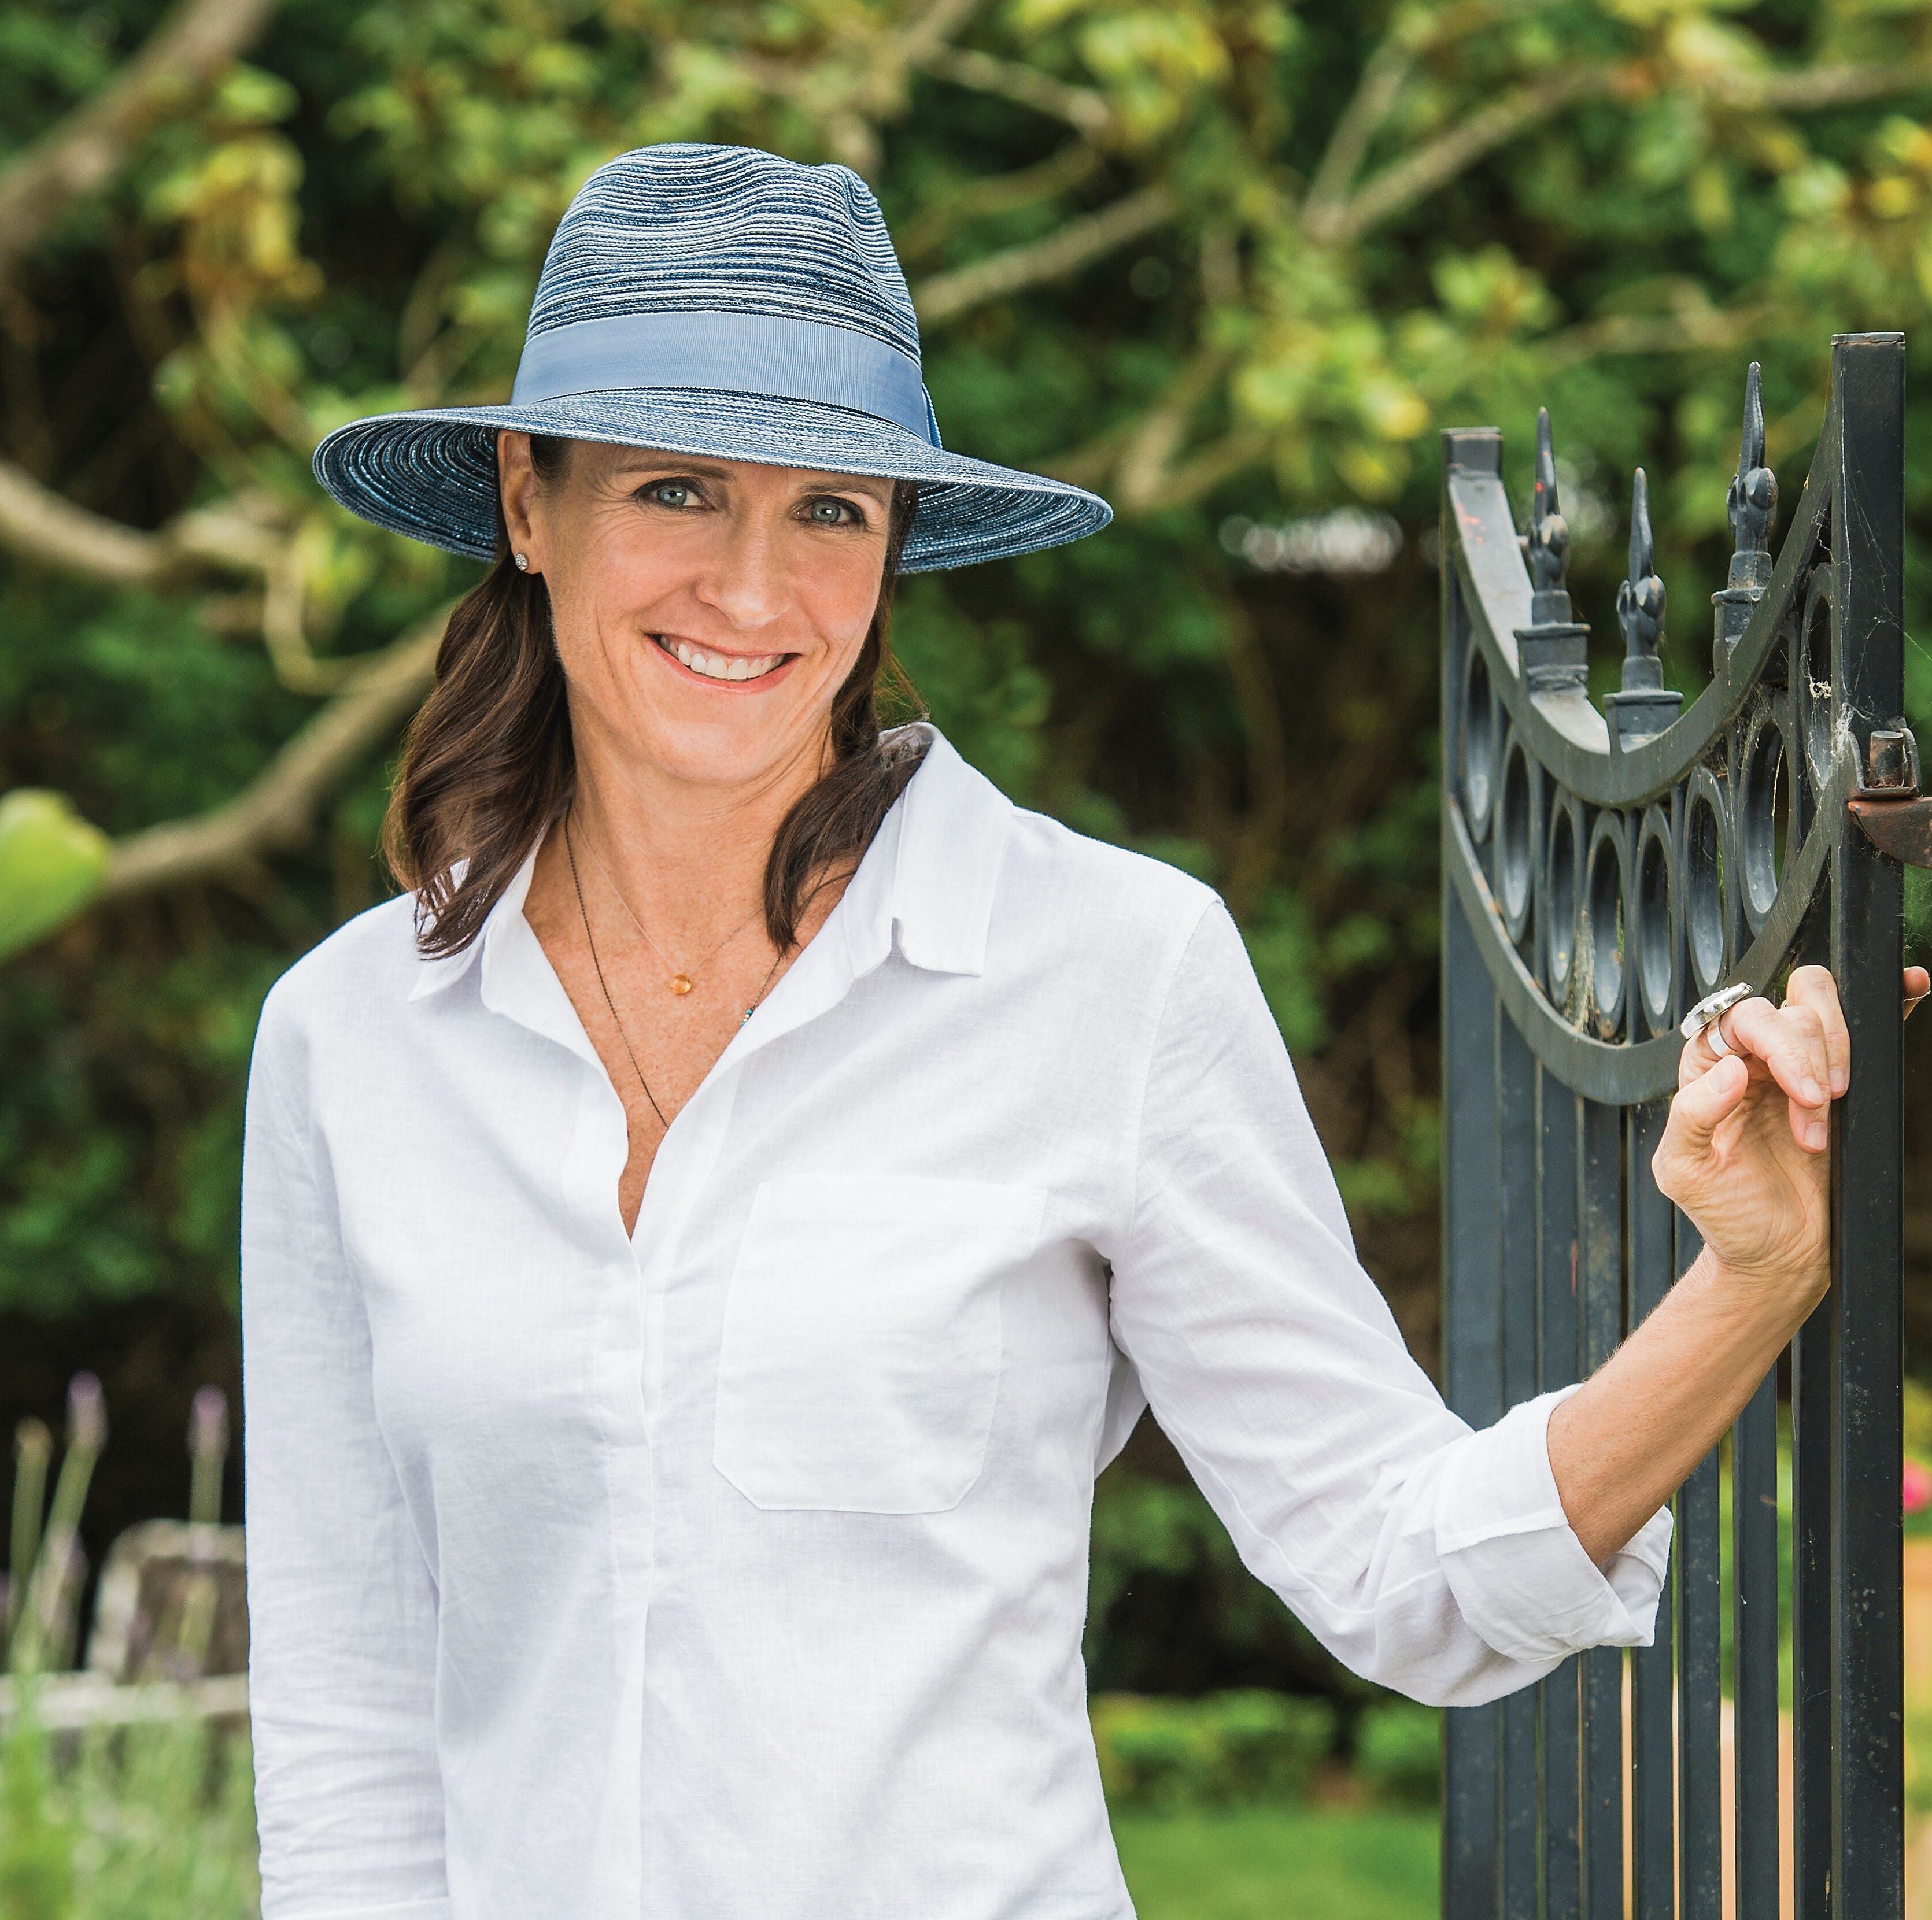 “5 Things I Wish Someone Told Me Before I Started” With Stephanie Carter Of The Wallaroo Hat